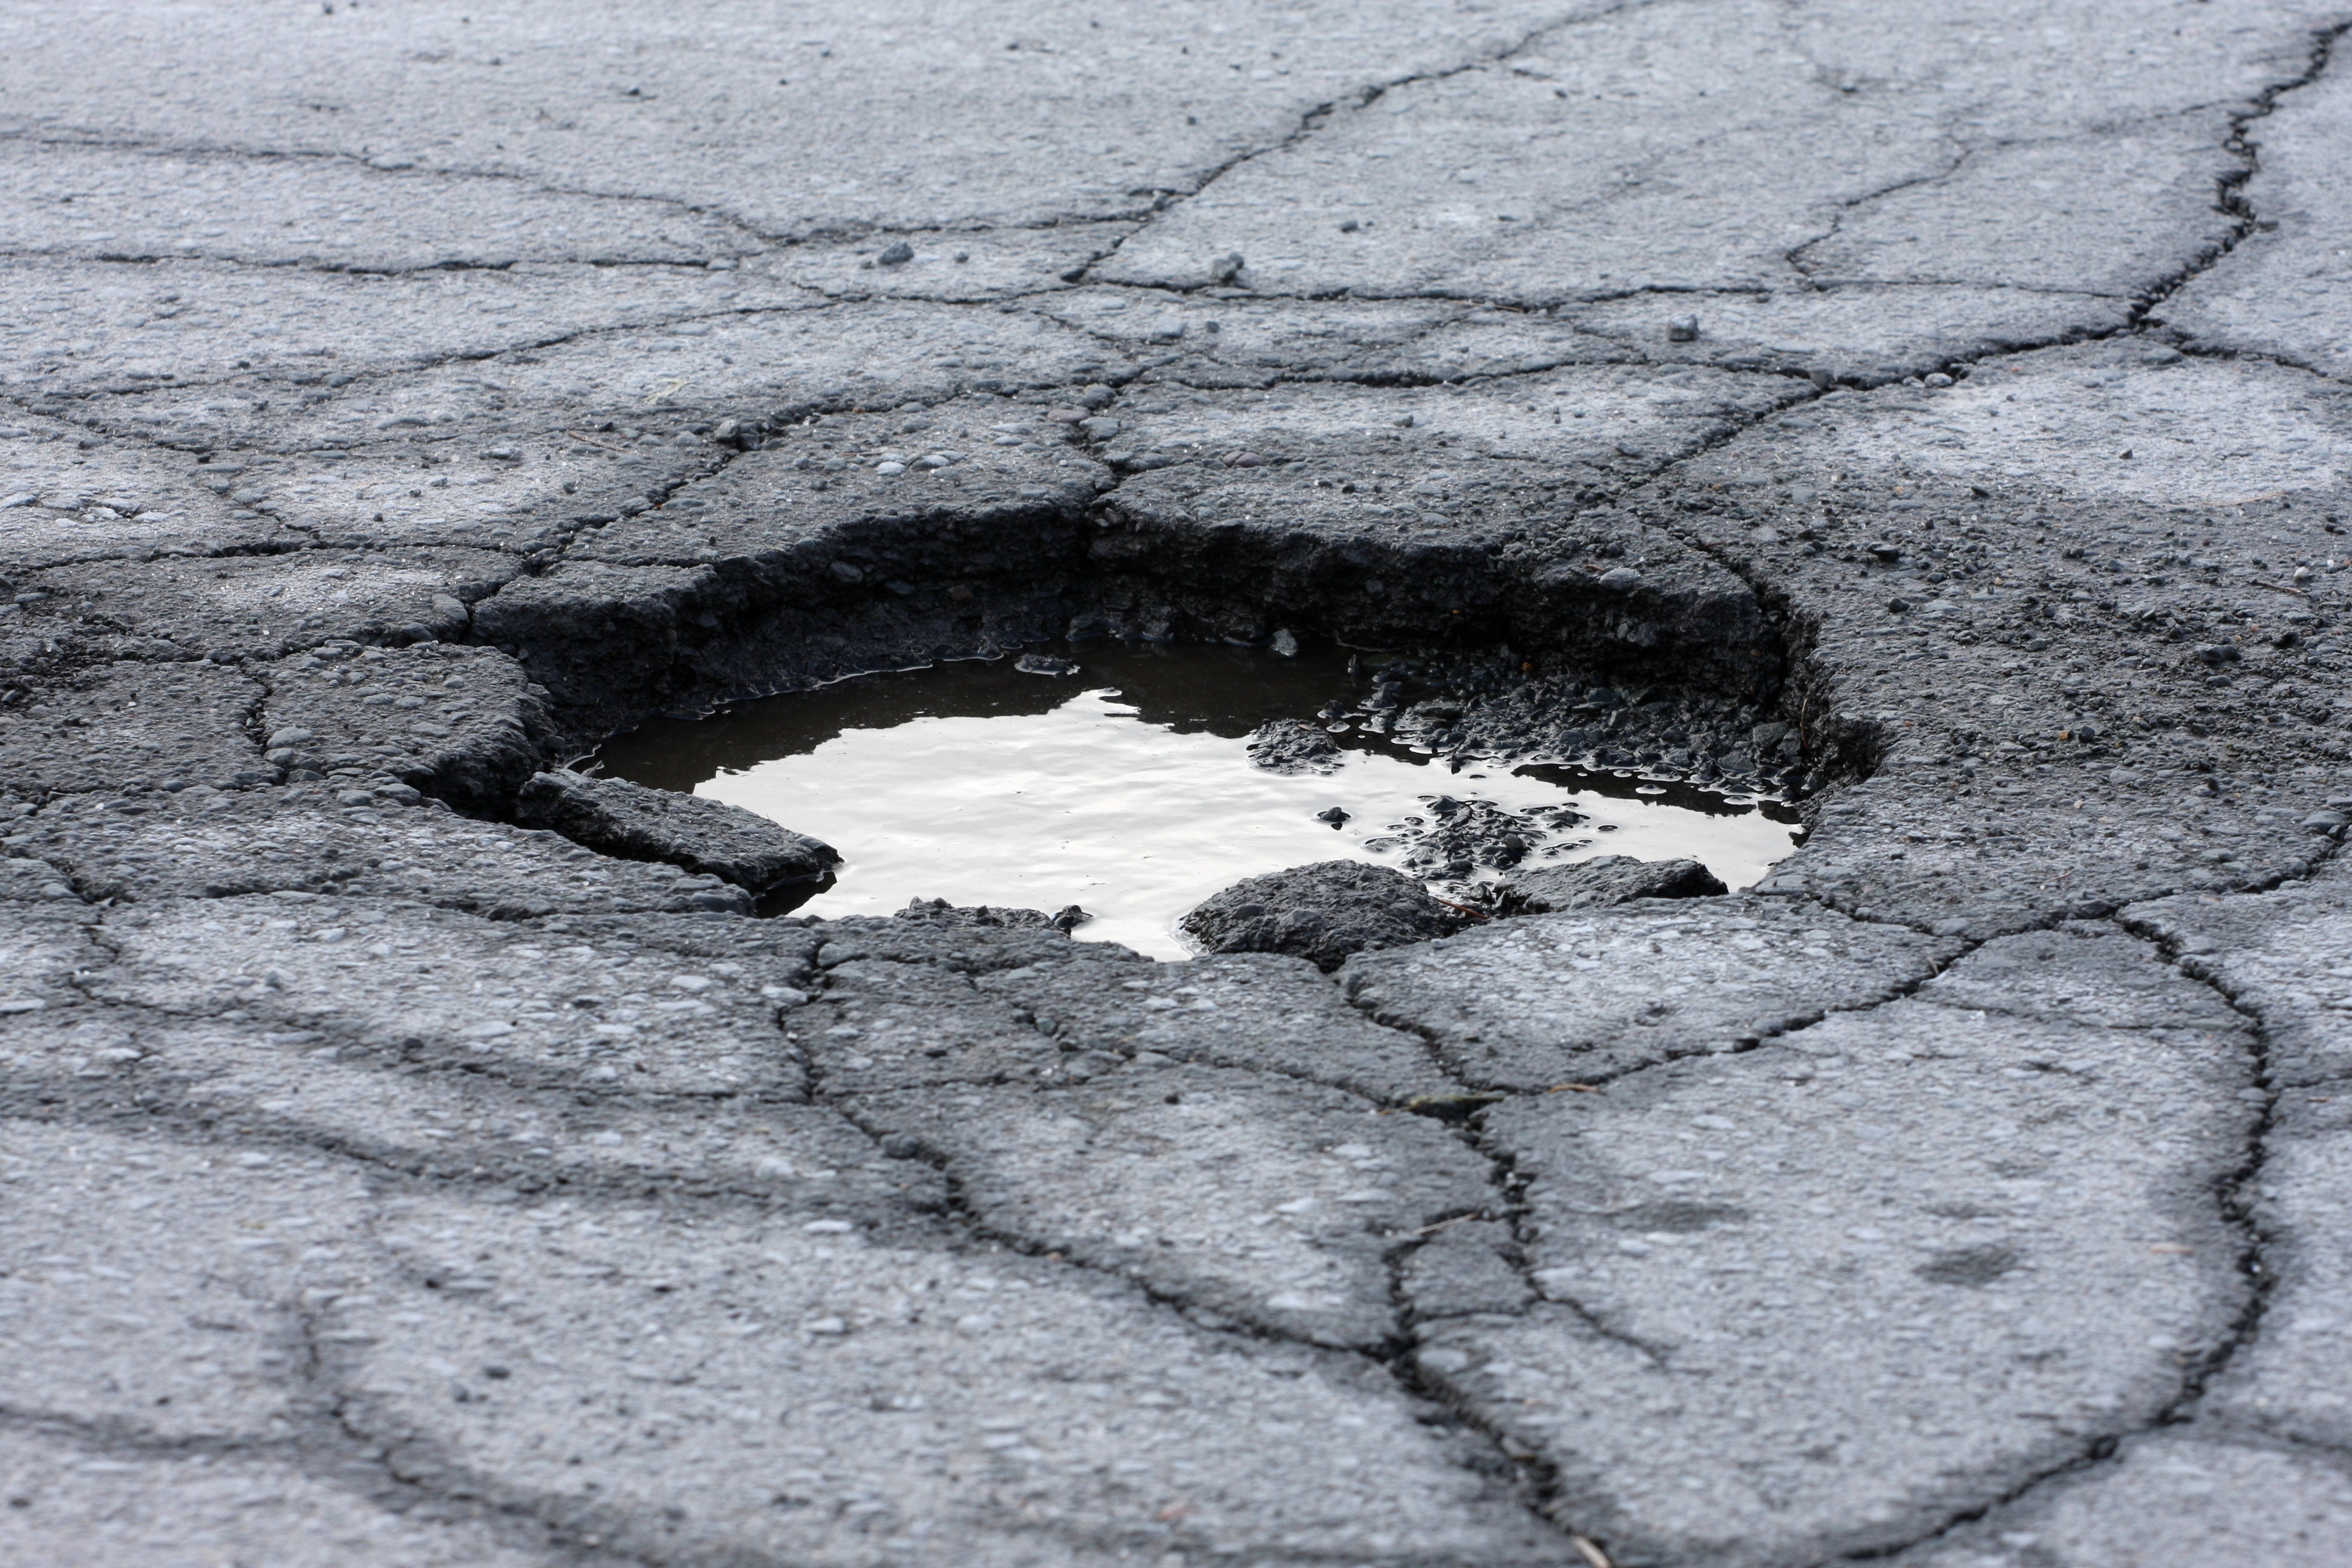 If you have comprehensive insurance, you can claim the damage that has been caused by the pothole